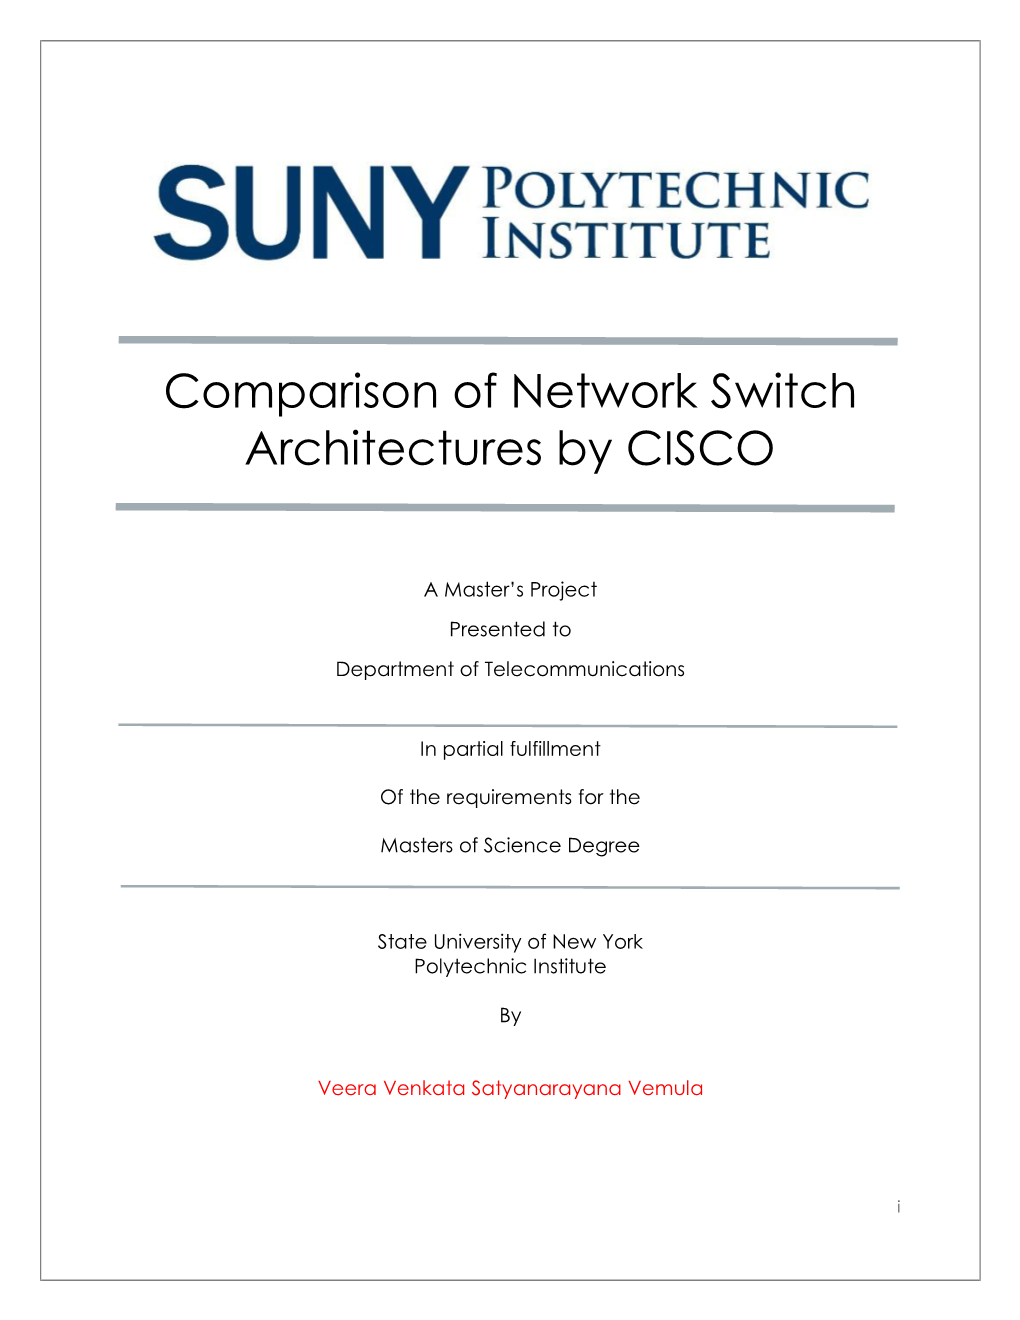 Comparison of Network Switch Architectures by CISCO